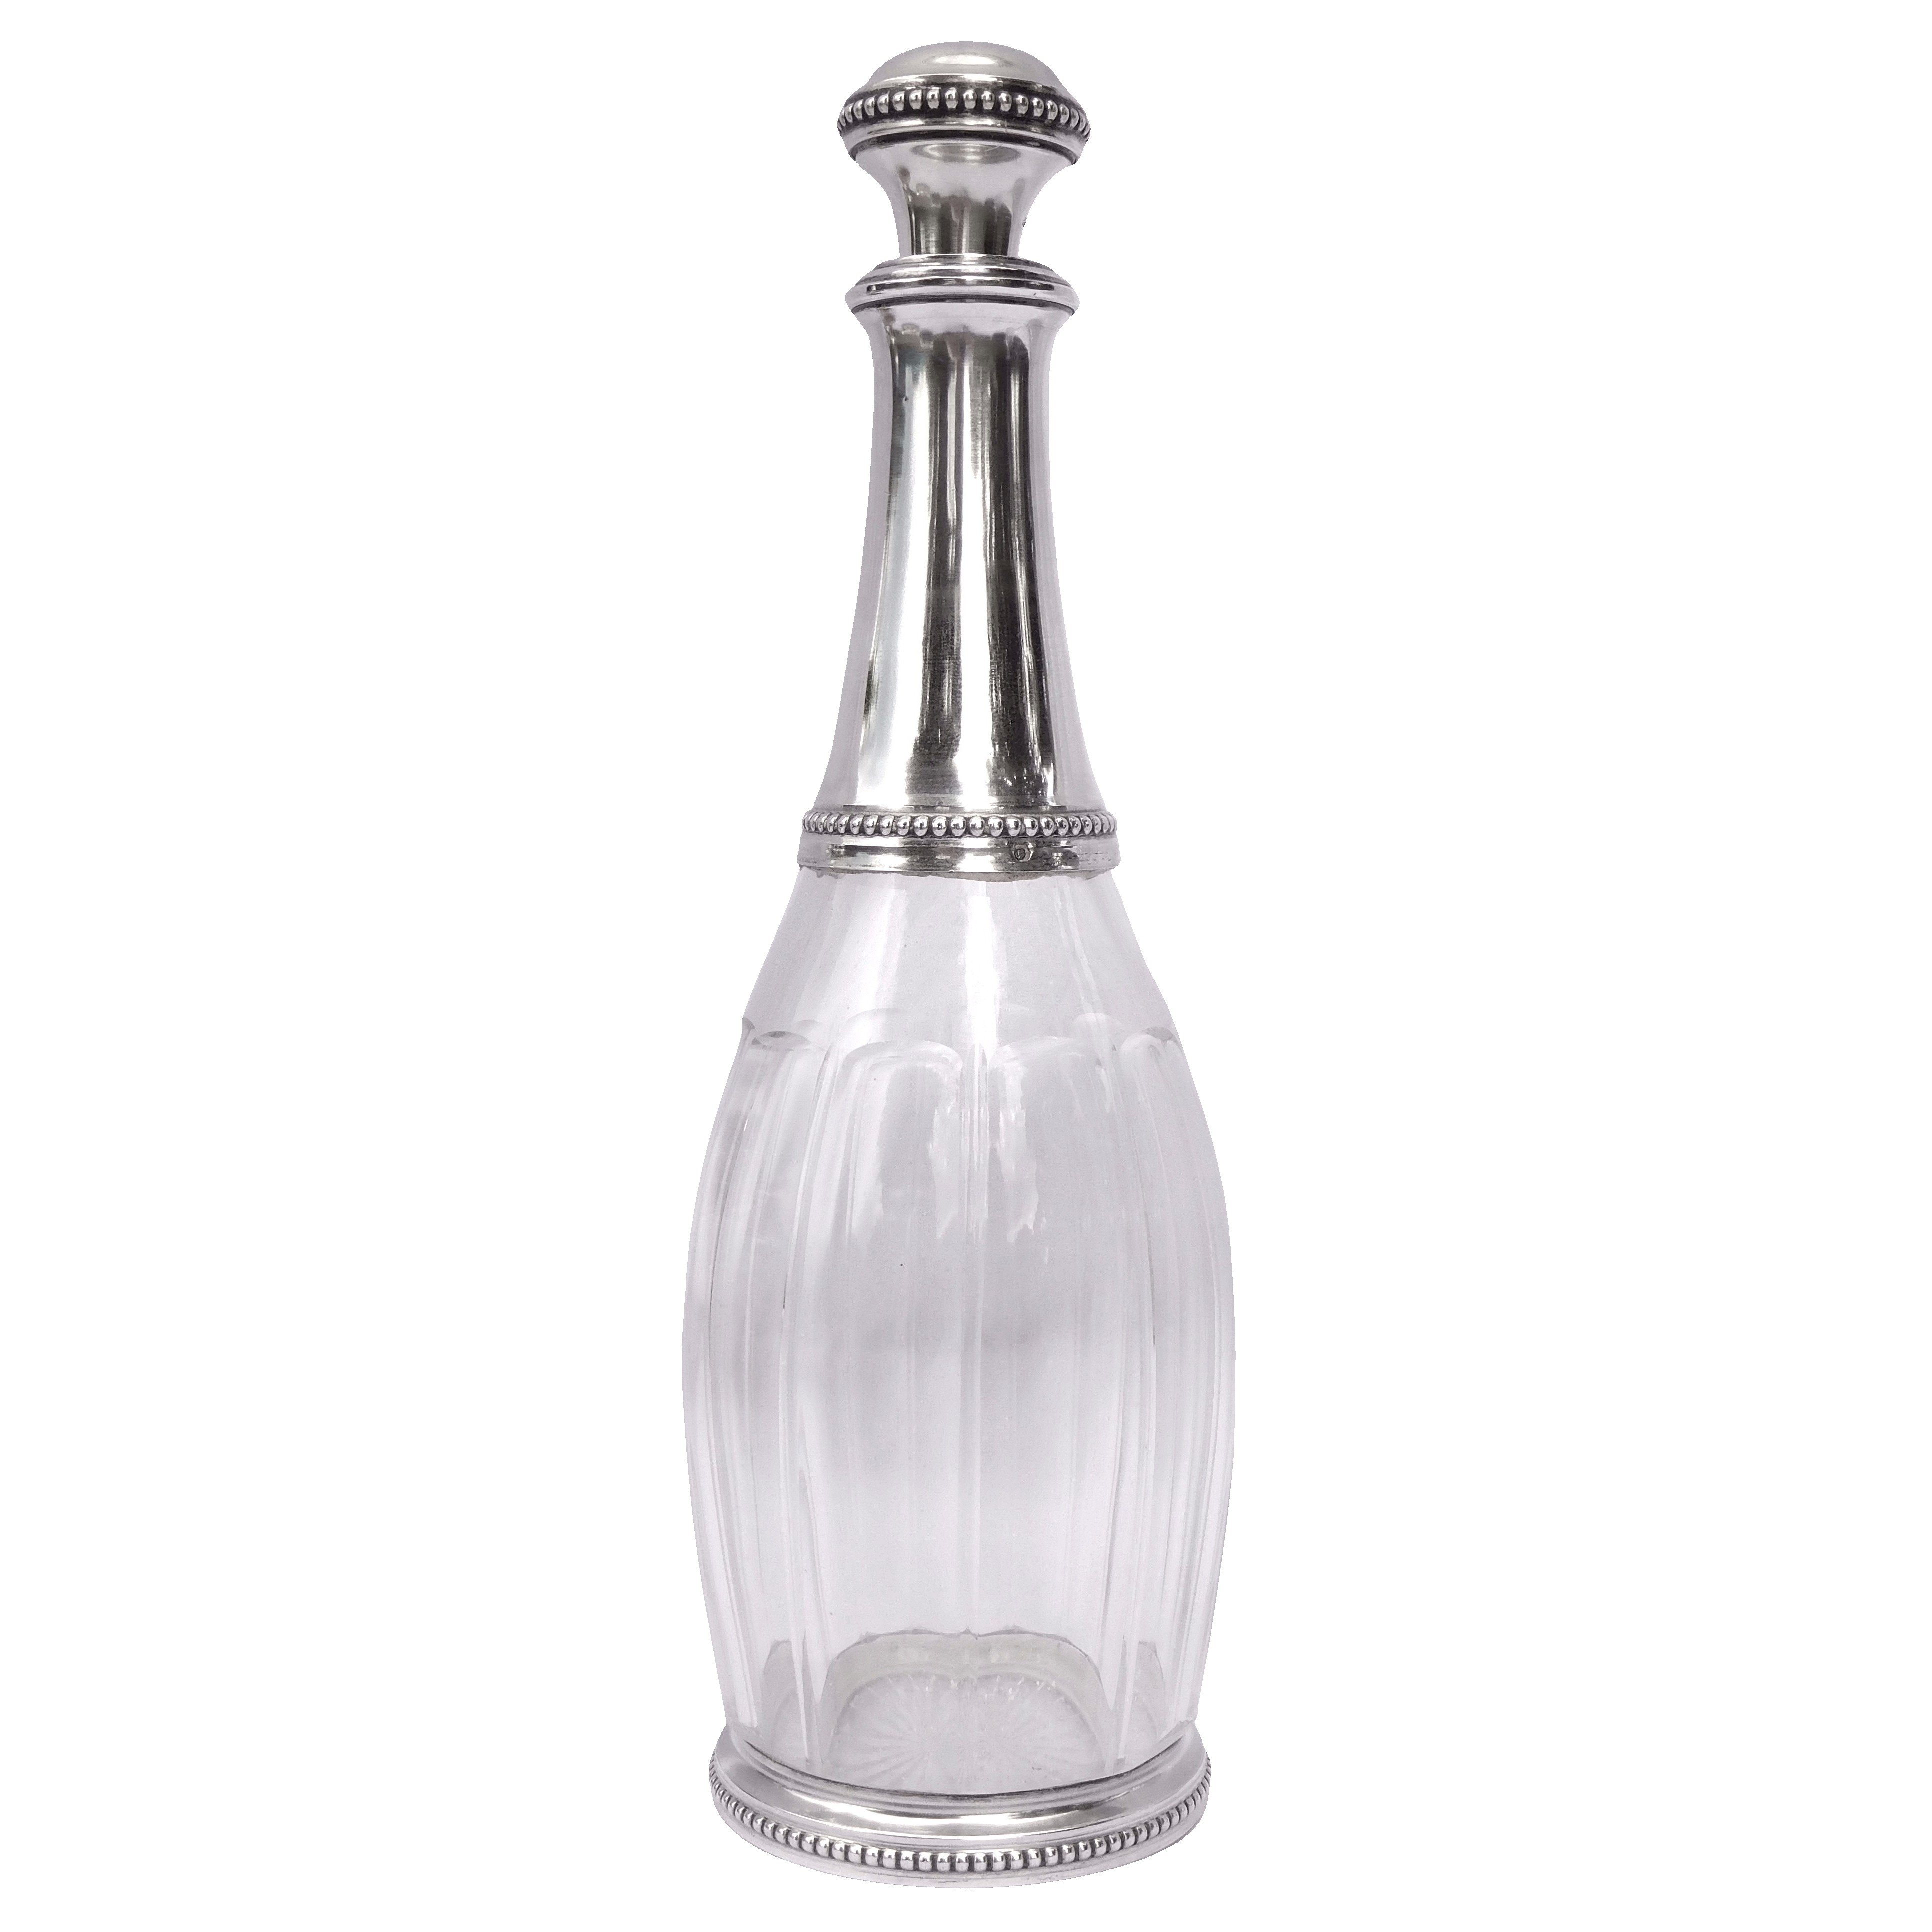 Baccarat crystal and sterling silver wine decanter, Louis XVI style